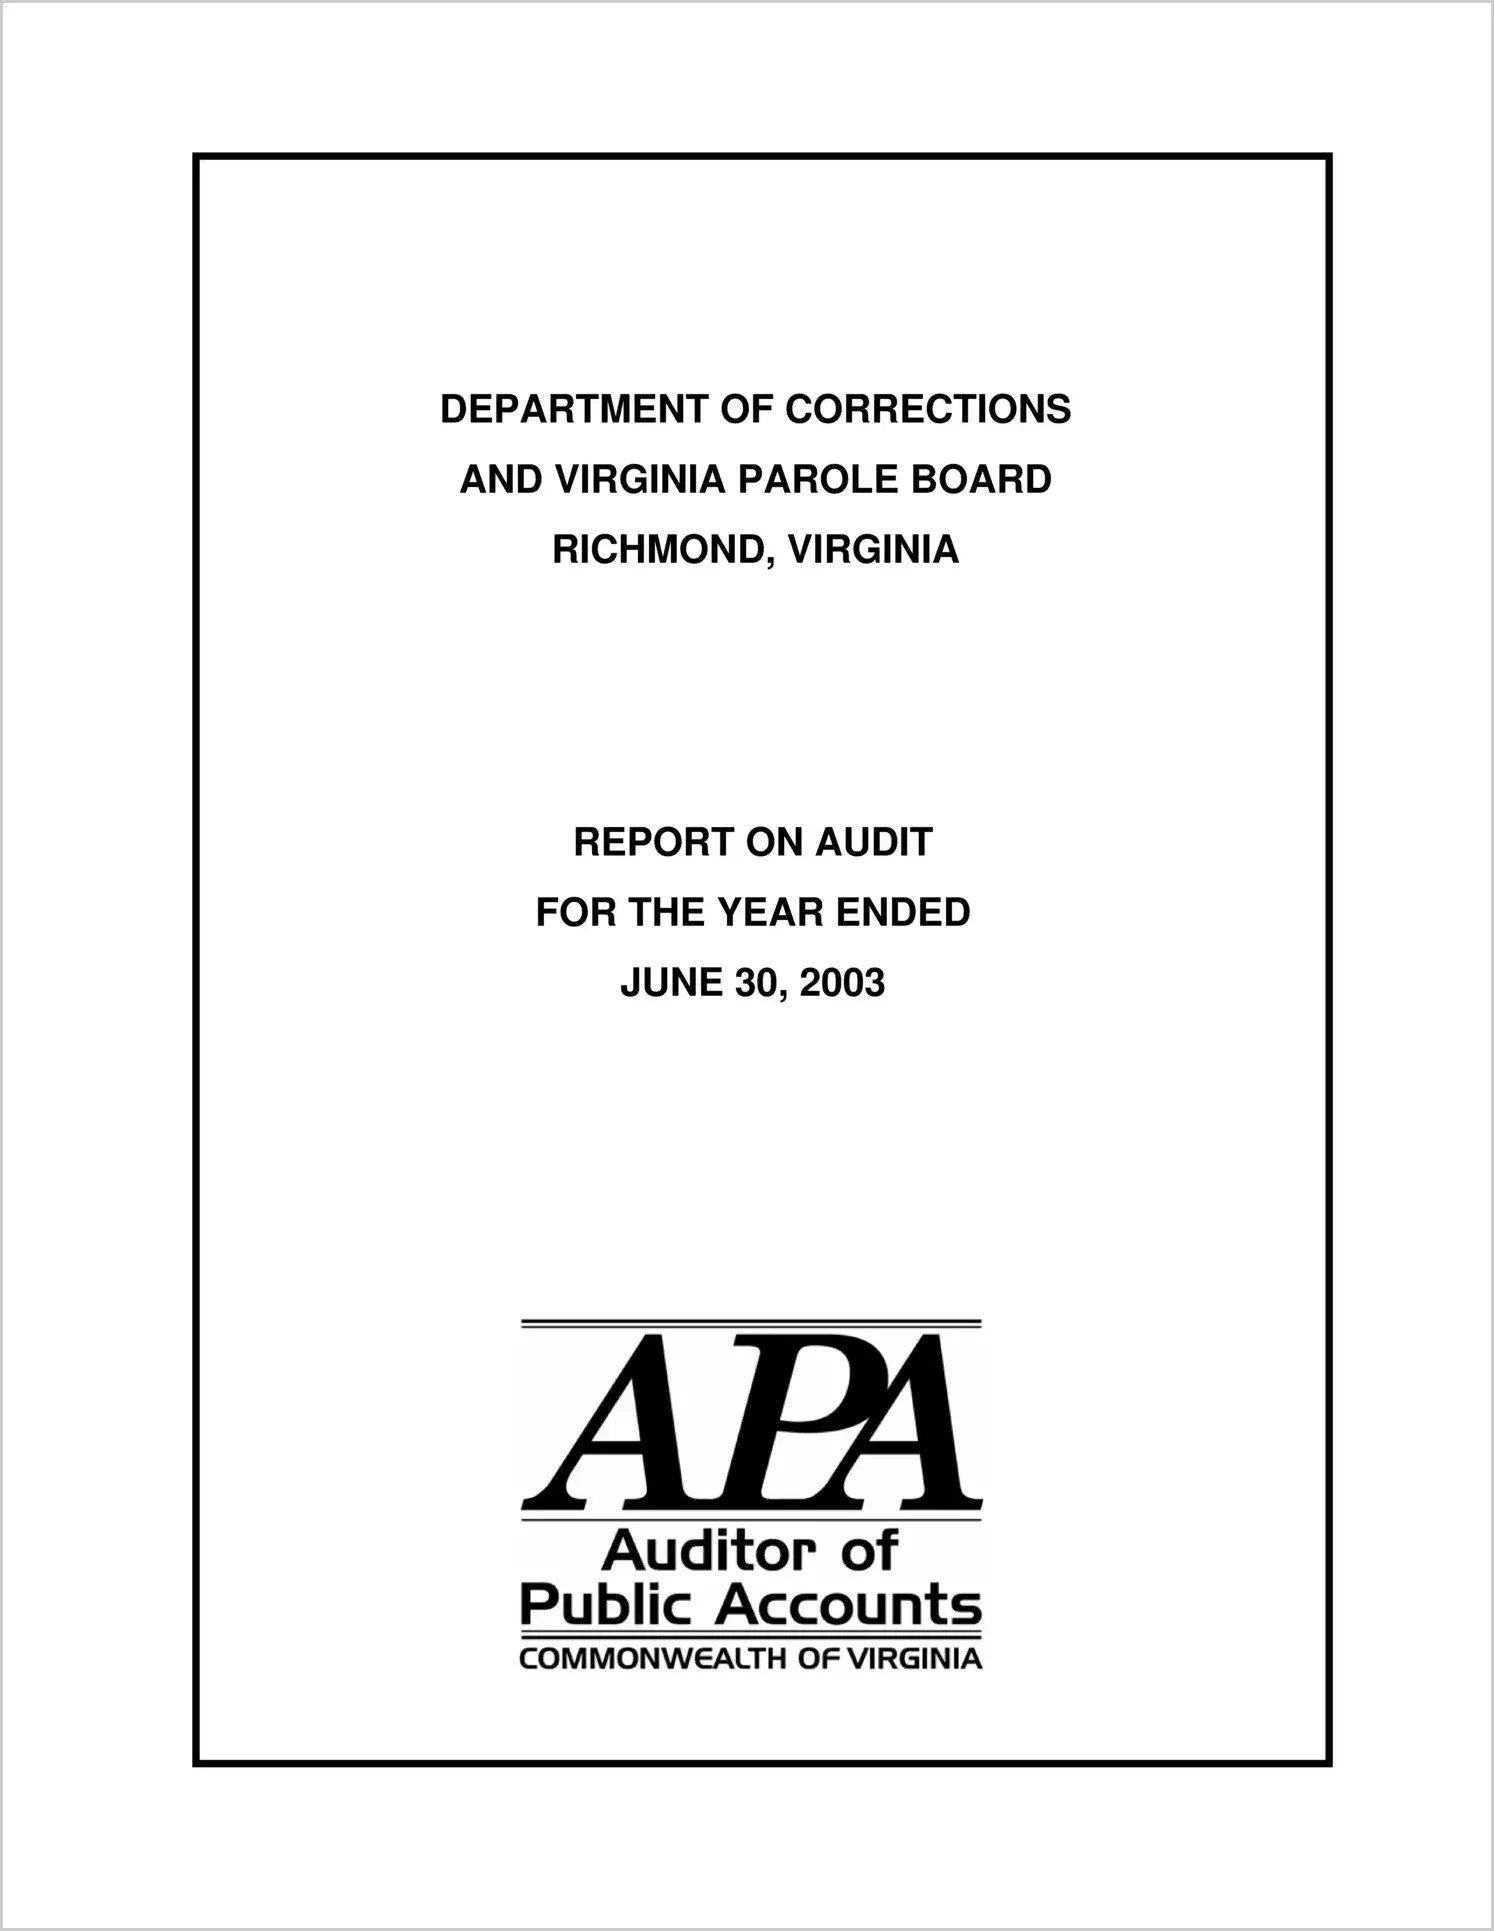 Department of Corrections and Virginia Parole Board for the year ended June 30, 2003